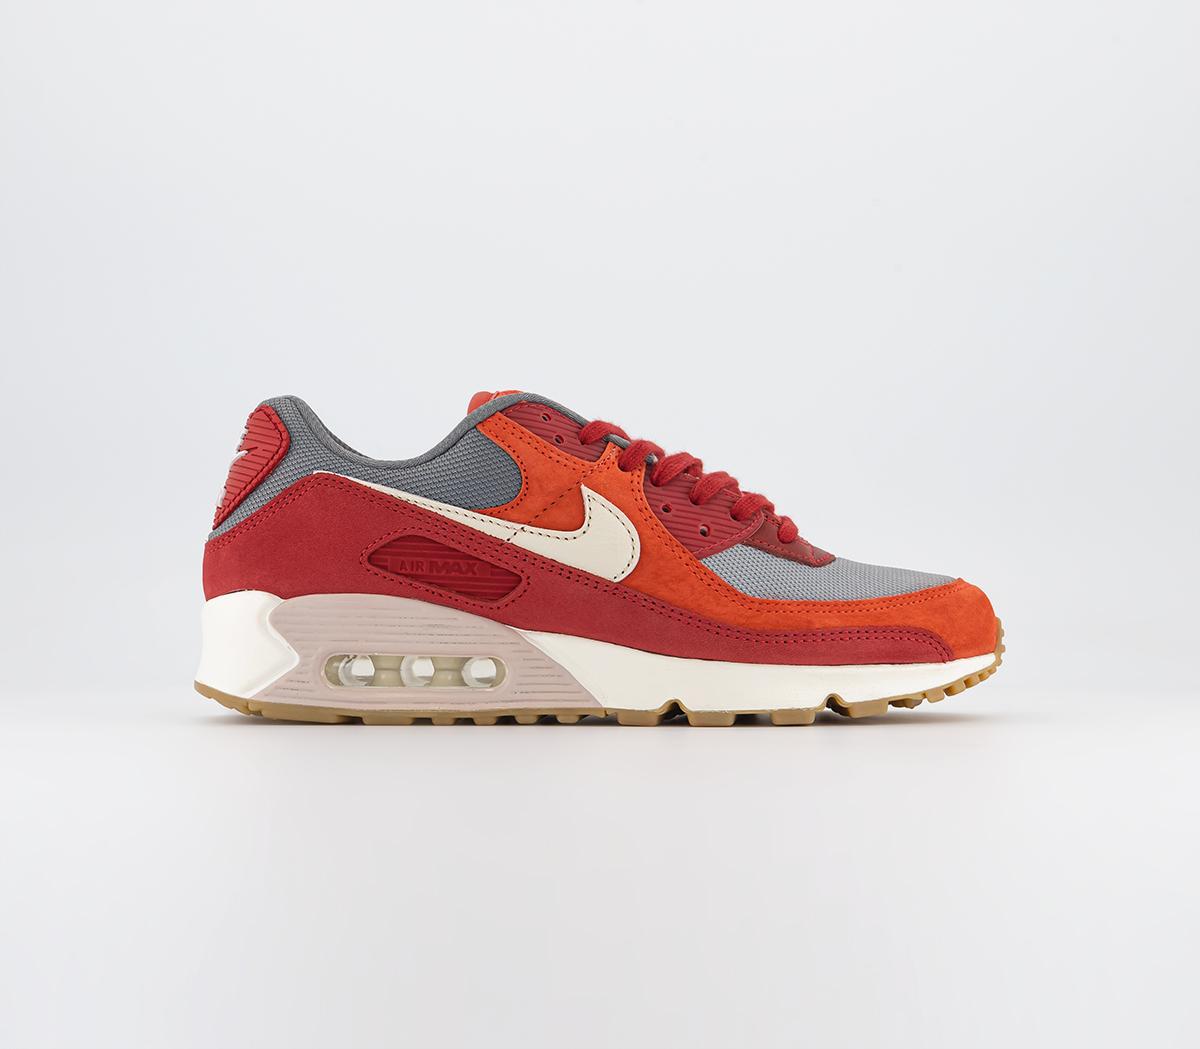 NikeAir Max 90 TrainersGym Red Pale Ivory Habanero Red Smoke Grey Particl